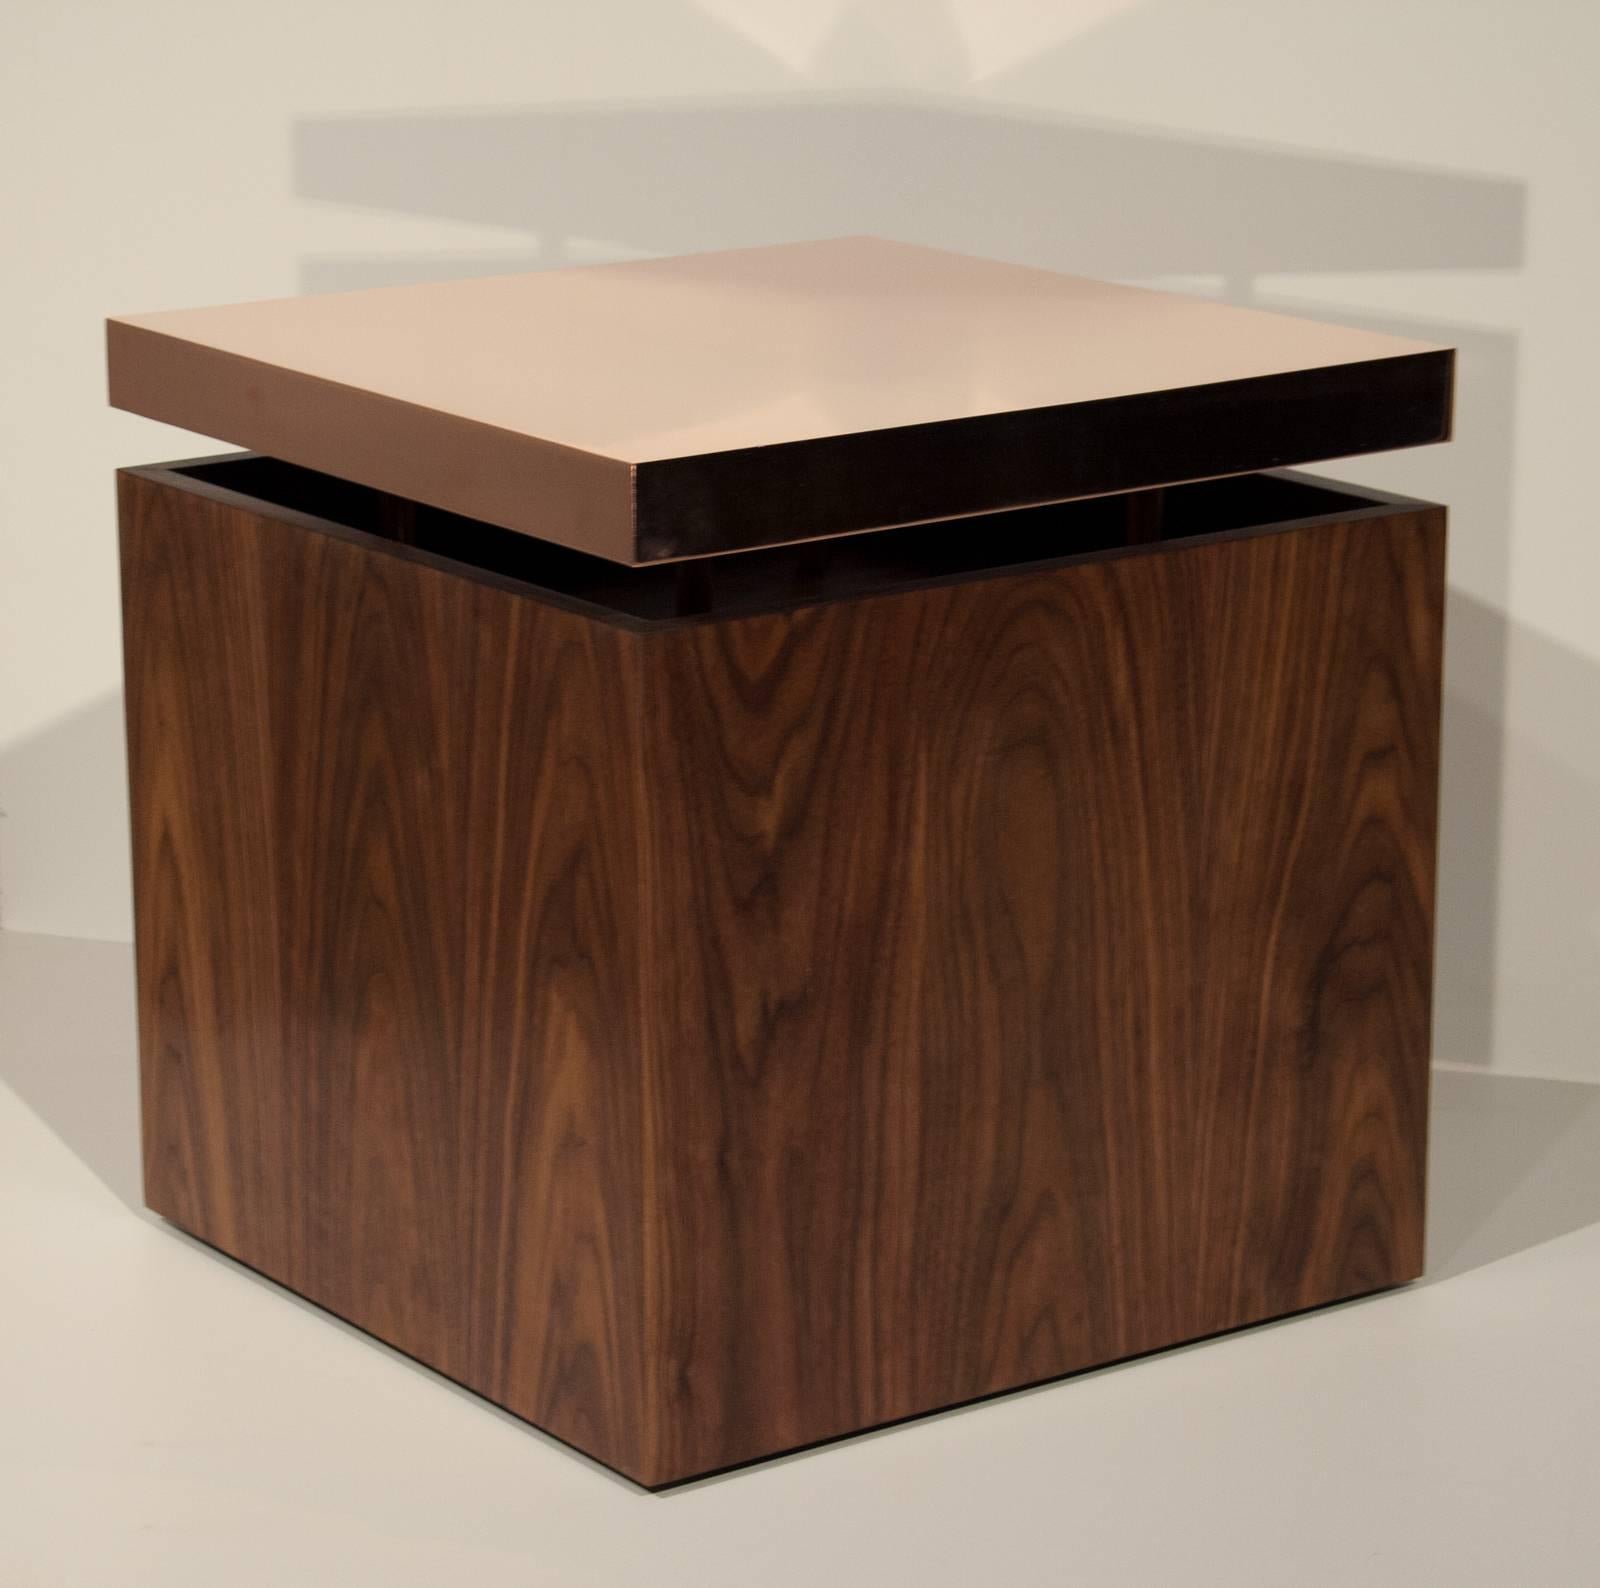 American Pair of Contemporary Cube End Tables in Copper and Walnut by Brant Ritter For Sale